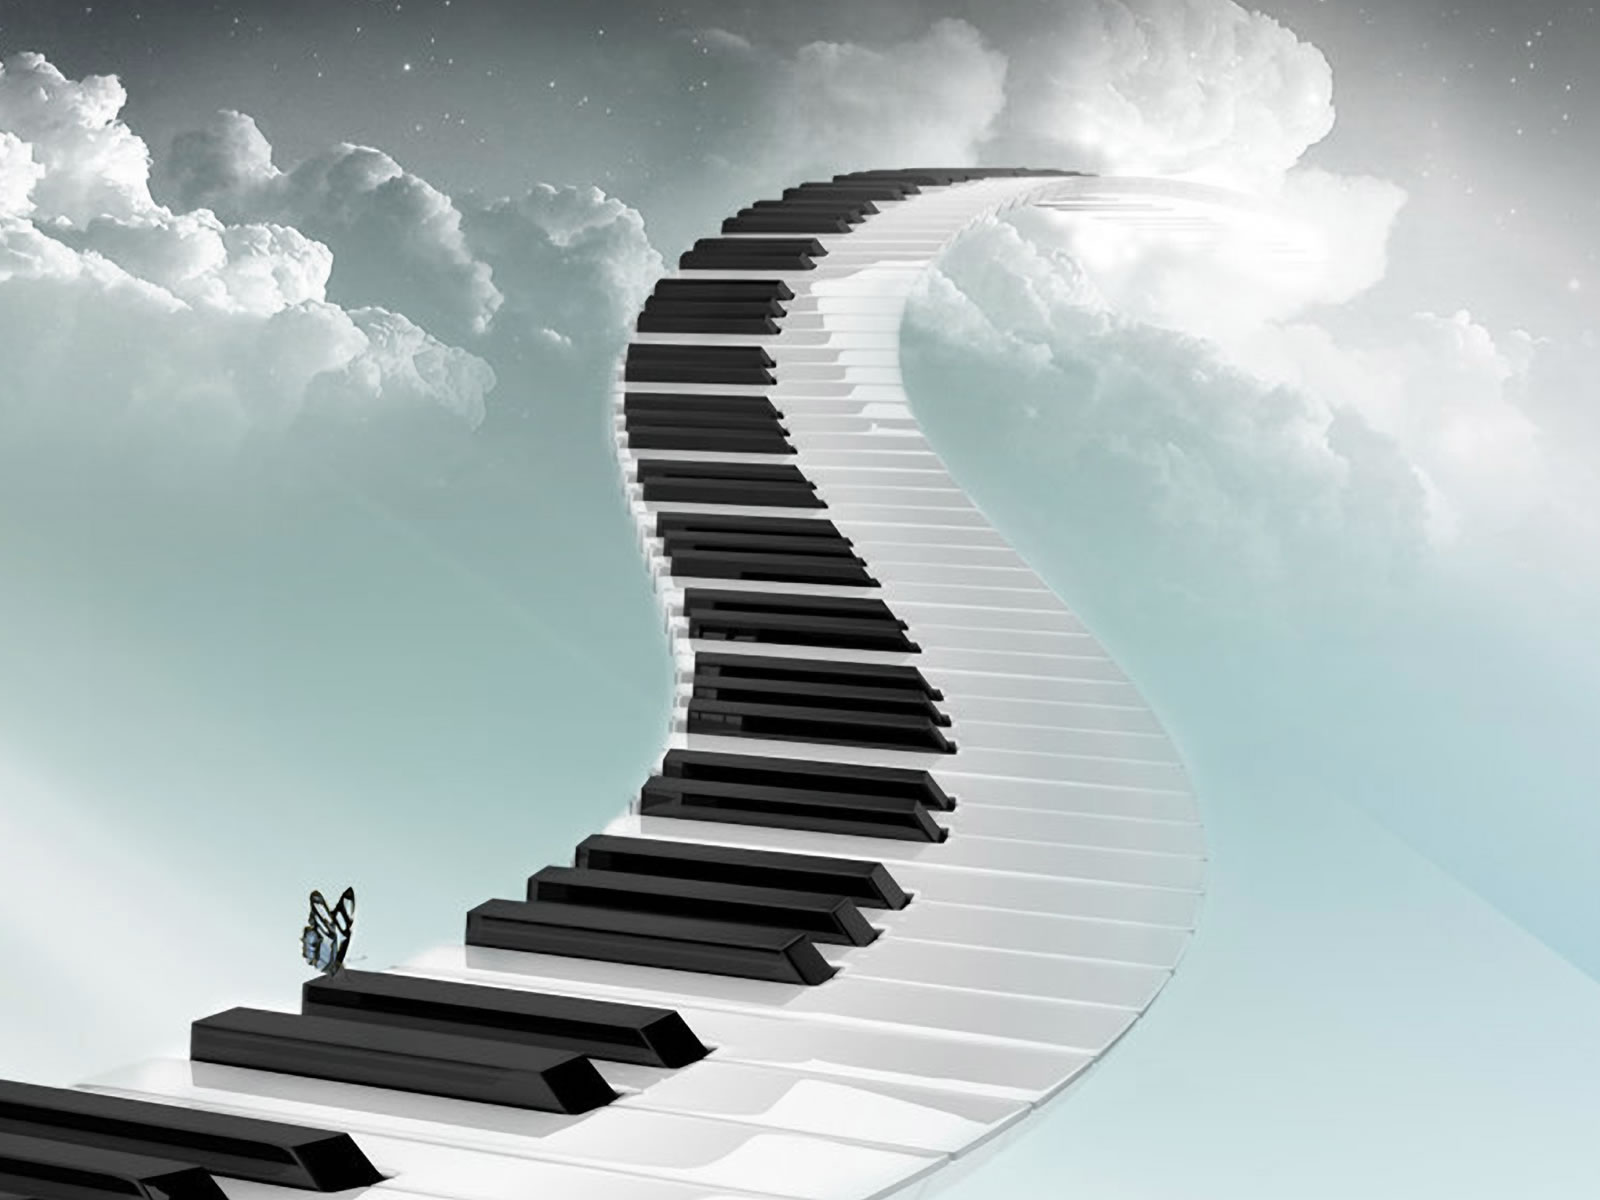 Awesome 47 Education Wallpapers - Piano Stairs To Heaven , HD Wallpaper & Backgrounds